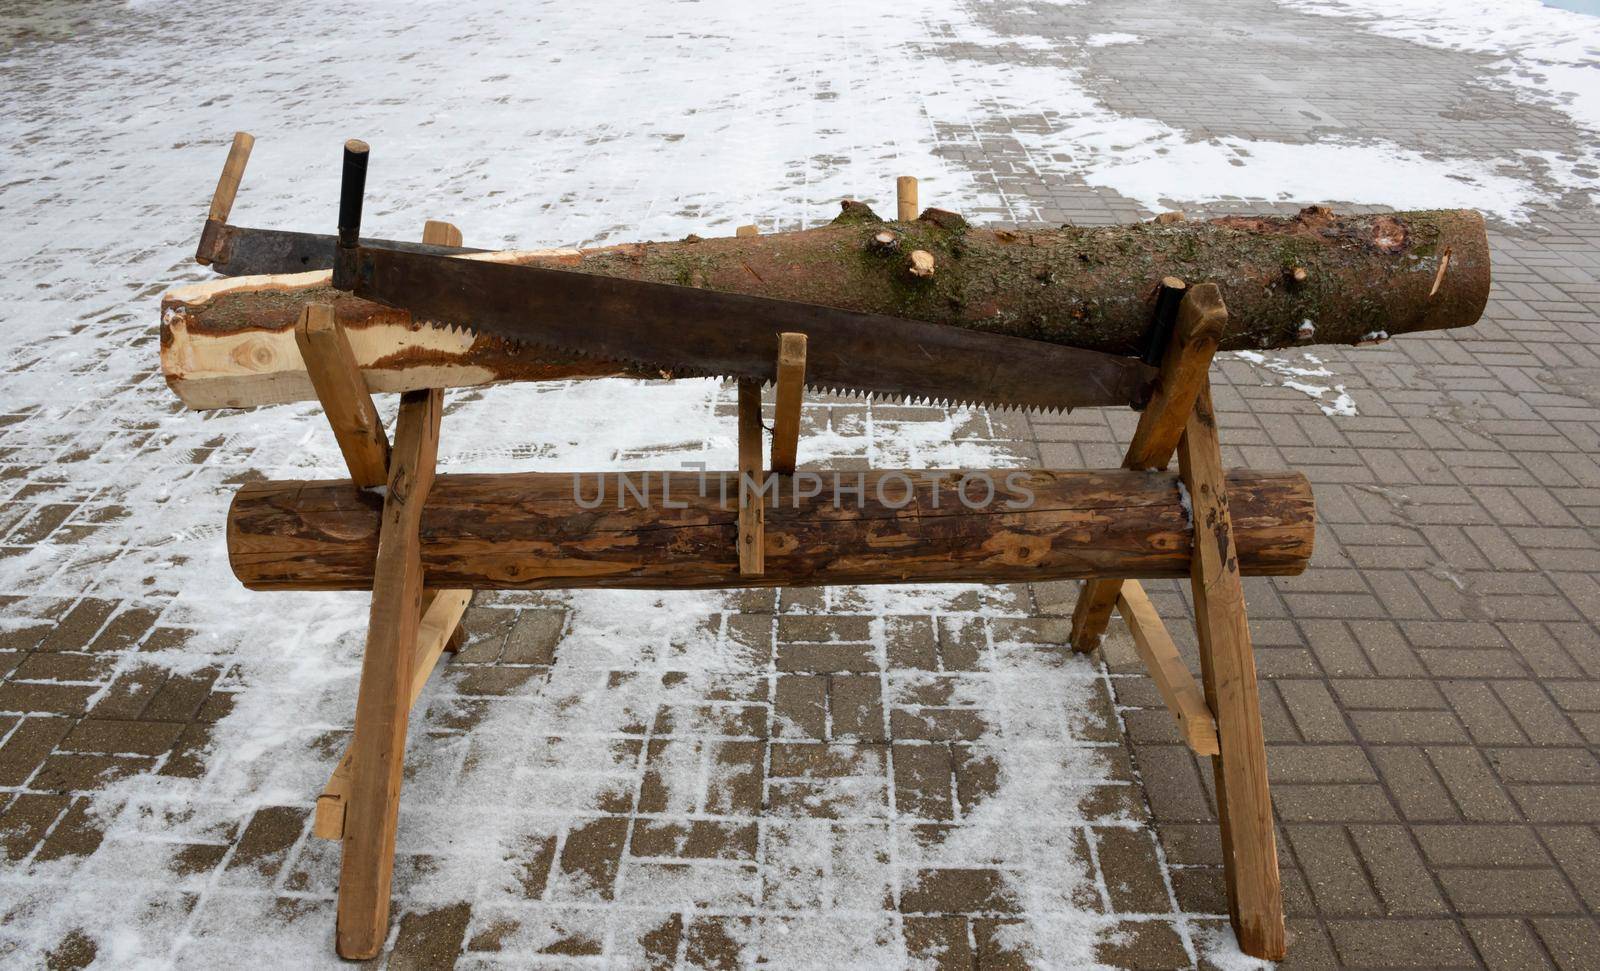 A wooden trestle with a coniferous log and two hand saws on it.